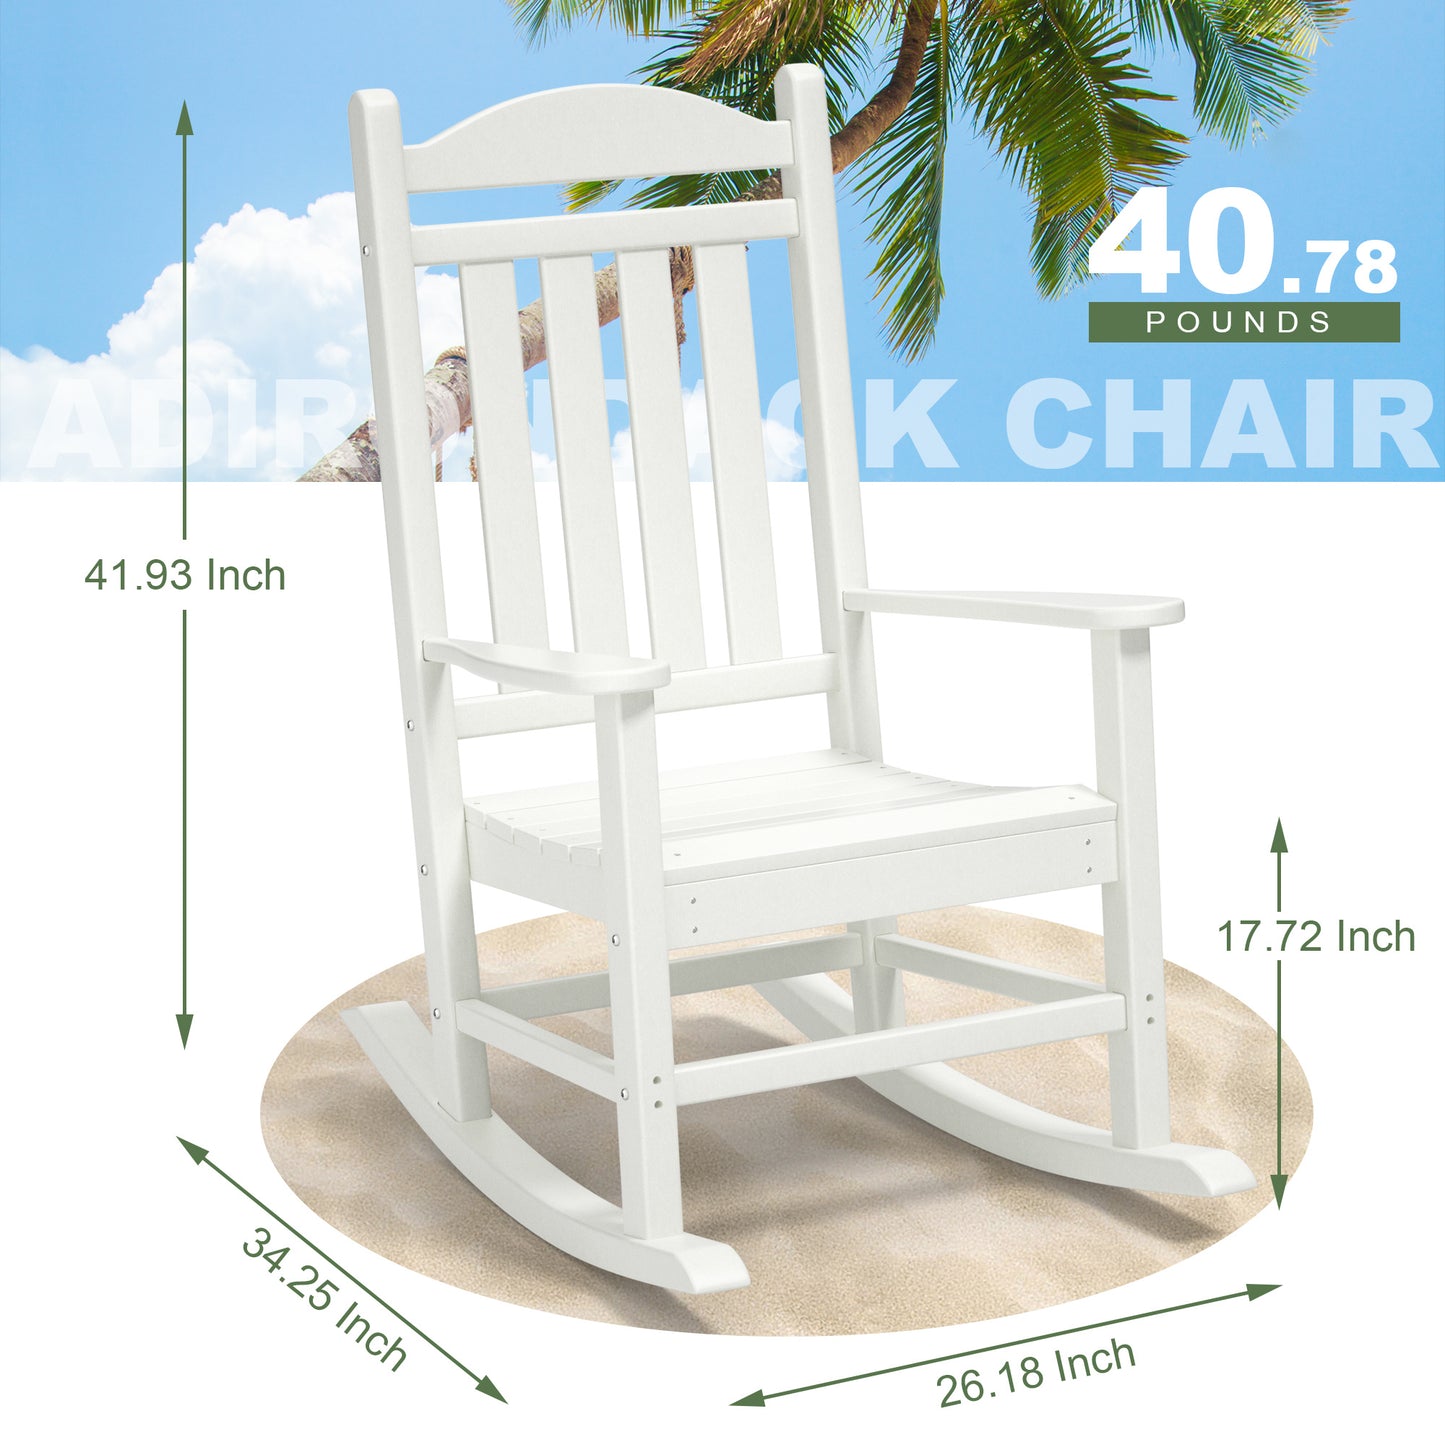 Outdoor Rocking Chairs All-Weather Resistant HDPE Poly Wood Resin Plastic, Humidity-Proof, Porch, Deck, Garden, Lawn, Backyard, Fire Pit, Garden Glider, Patio Rocker With High Backrest